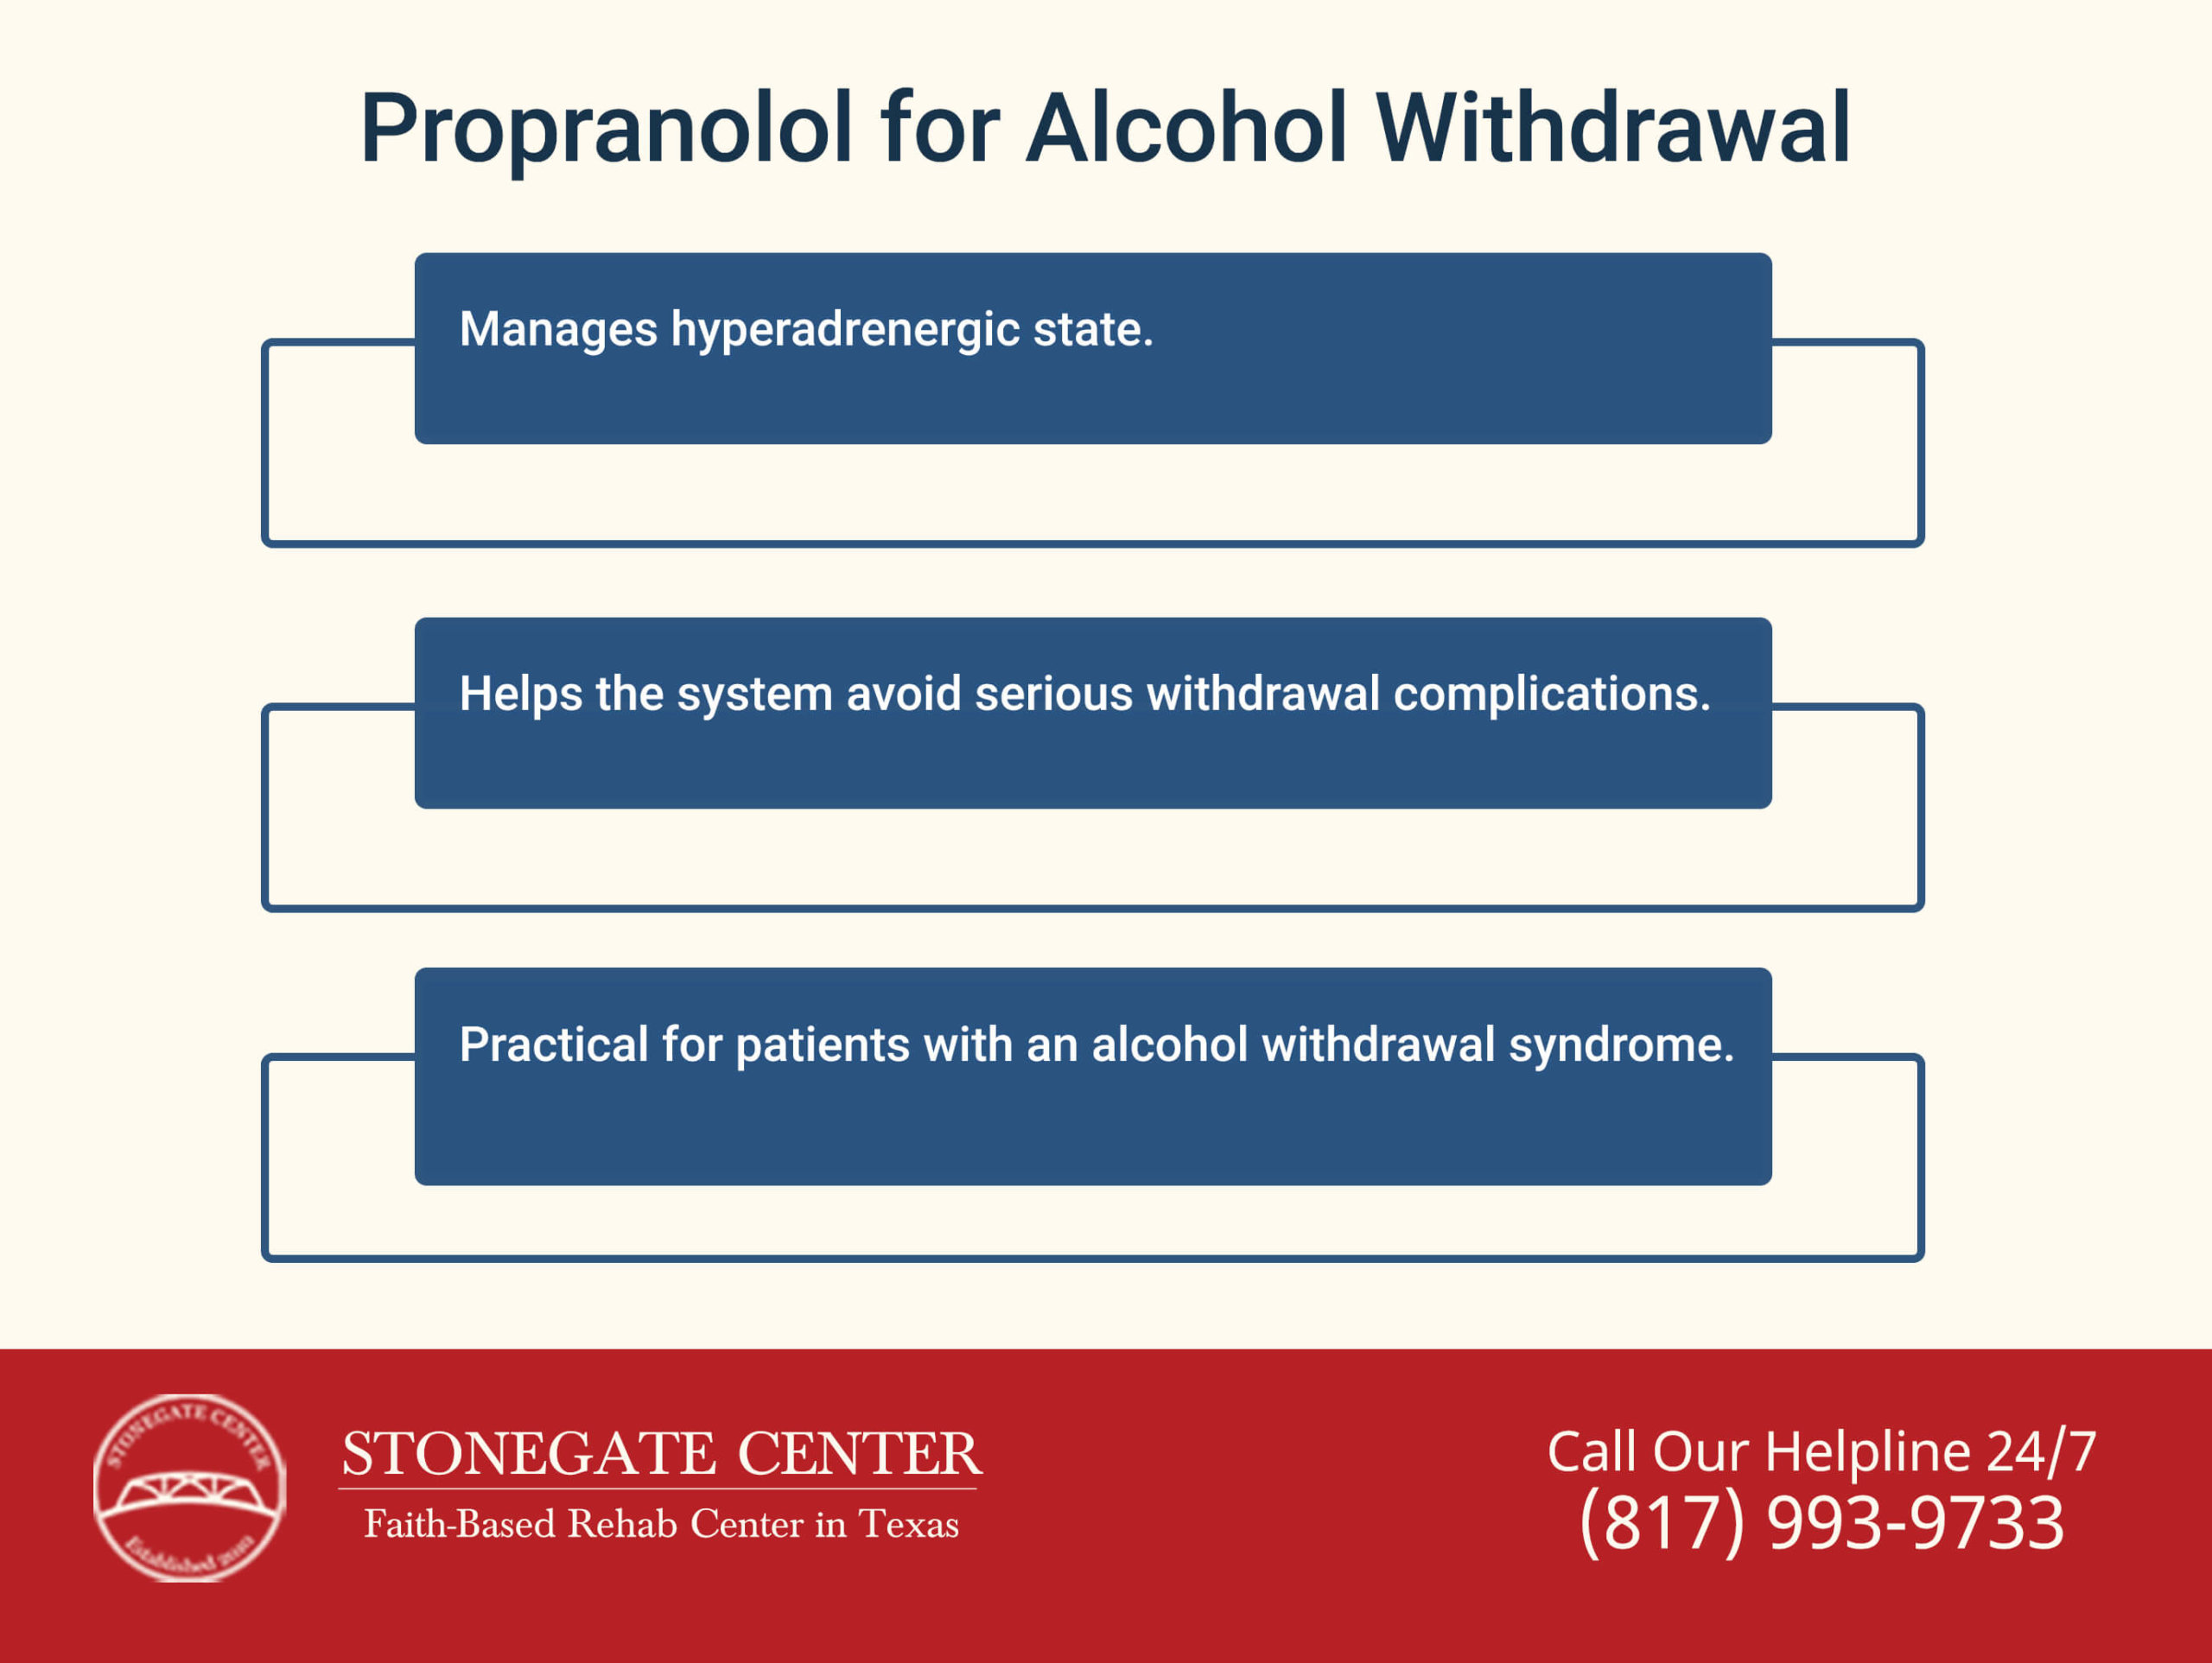 Stonegate Center Blog - Is Propranolol One of the Most Common Medications Given at Detox Centers? - Propranolol for Alcohol Withdrawal